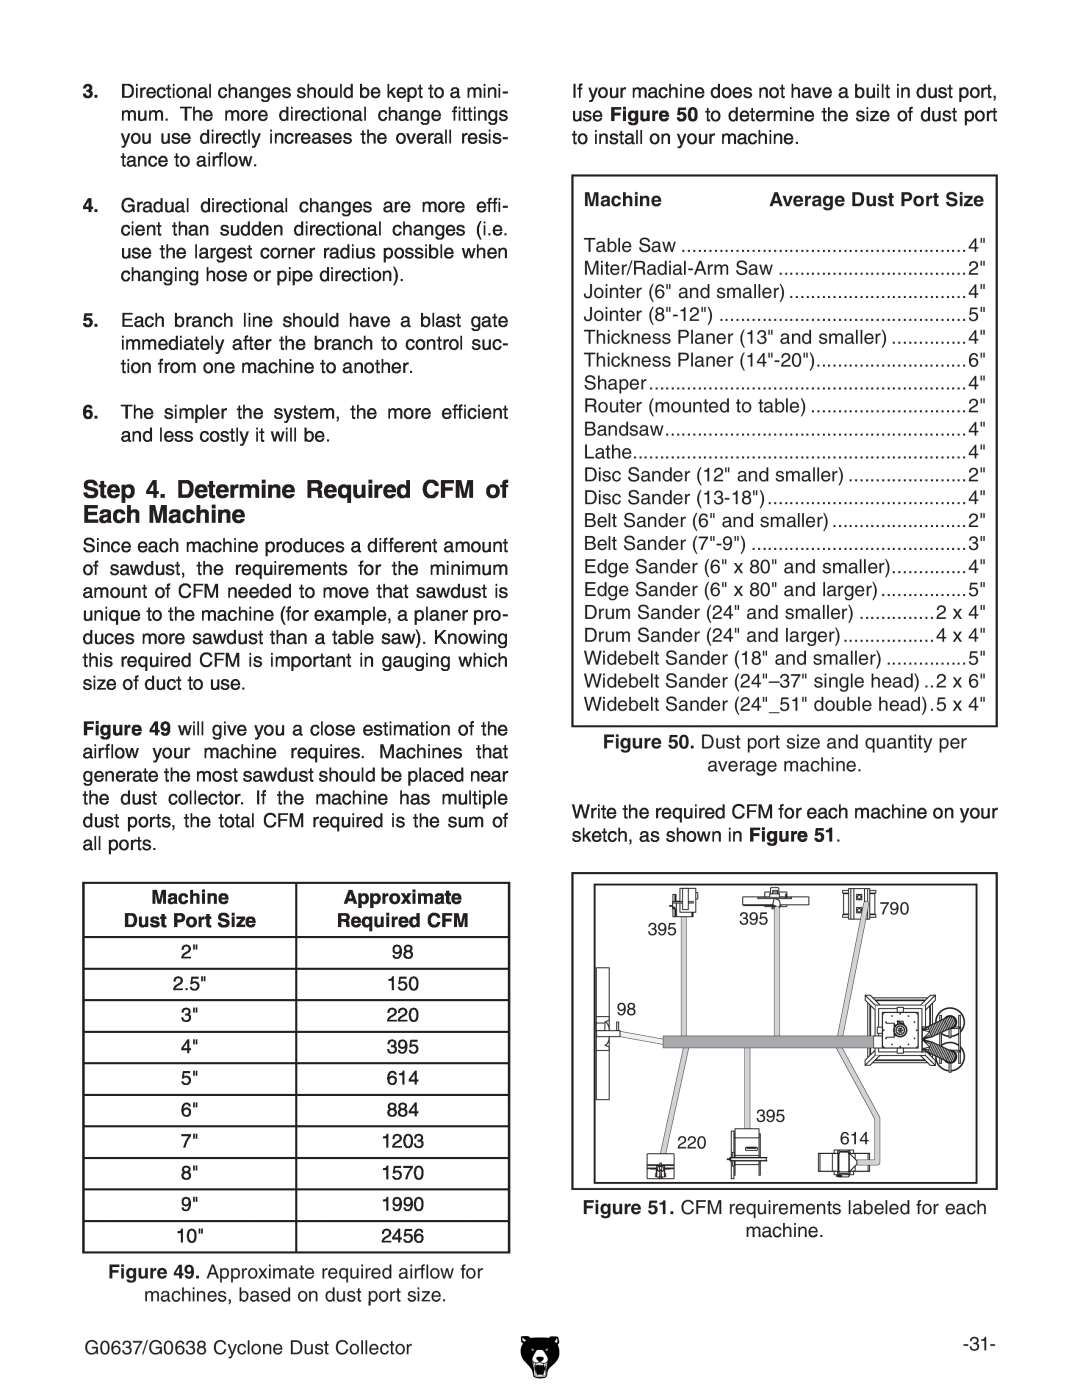 Grizzly G0638, G0637 owner manual Determine Required CFM of Each Machine, Approximate 